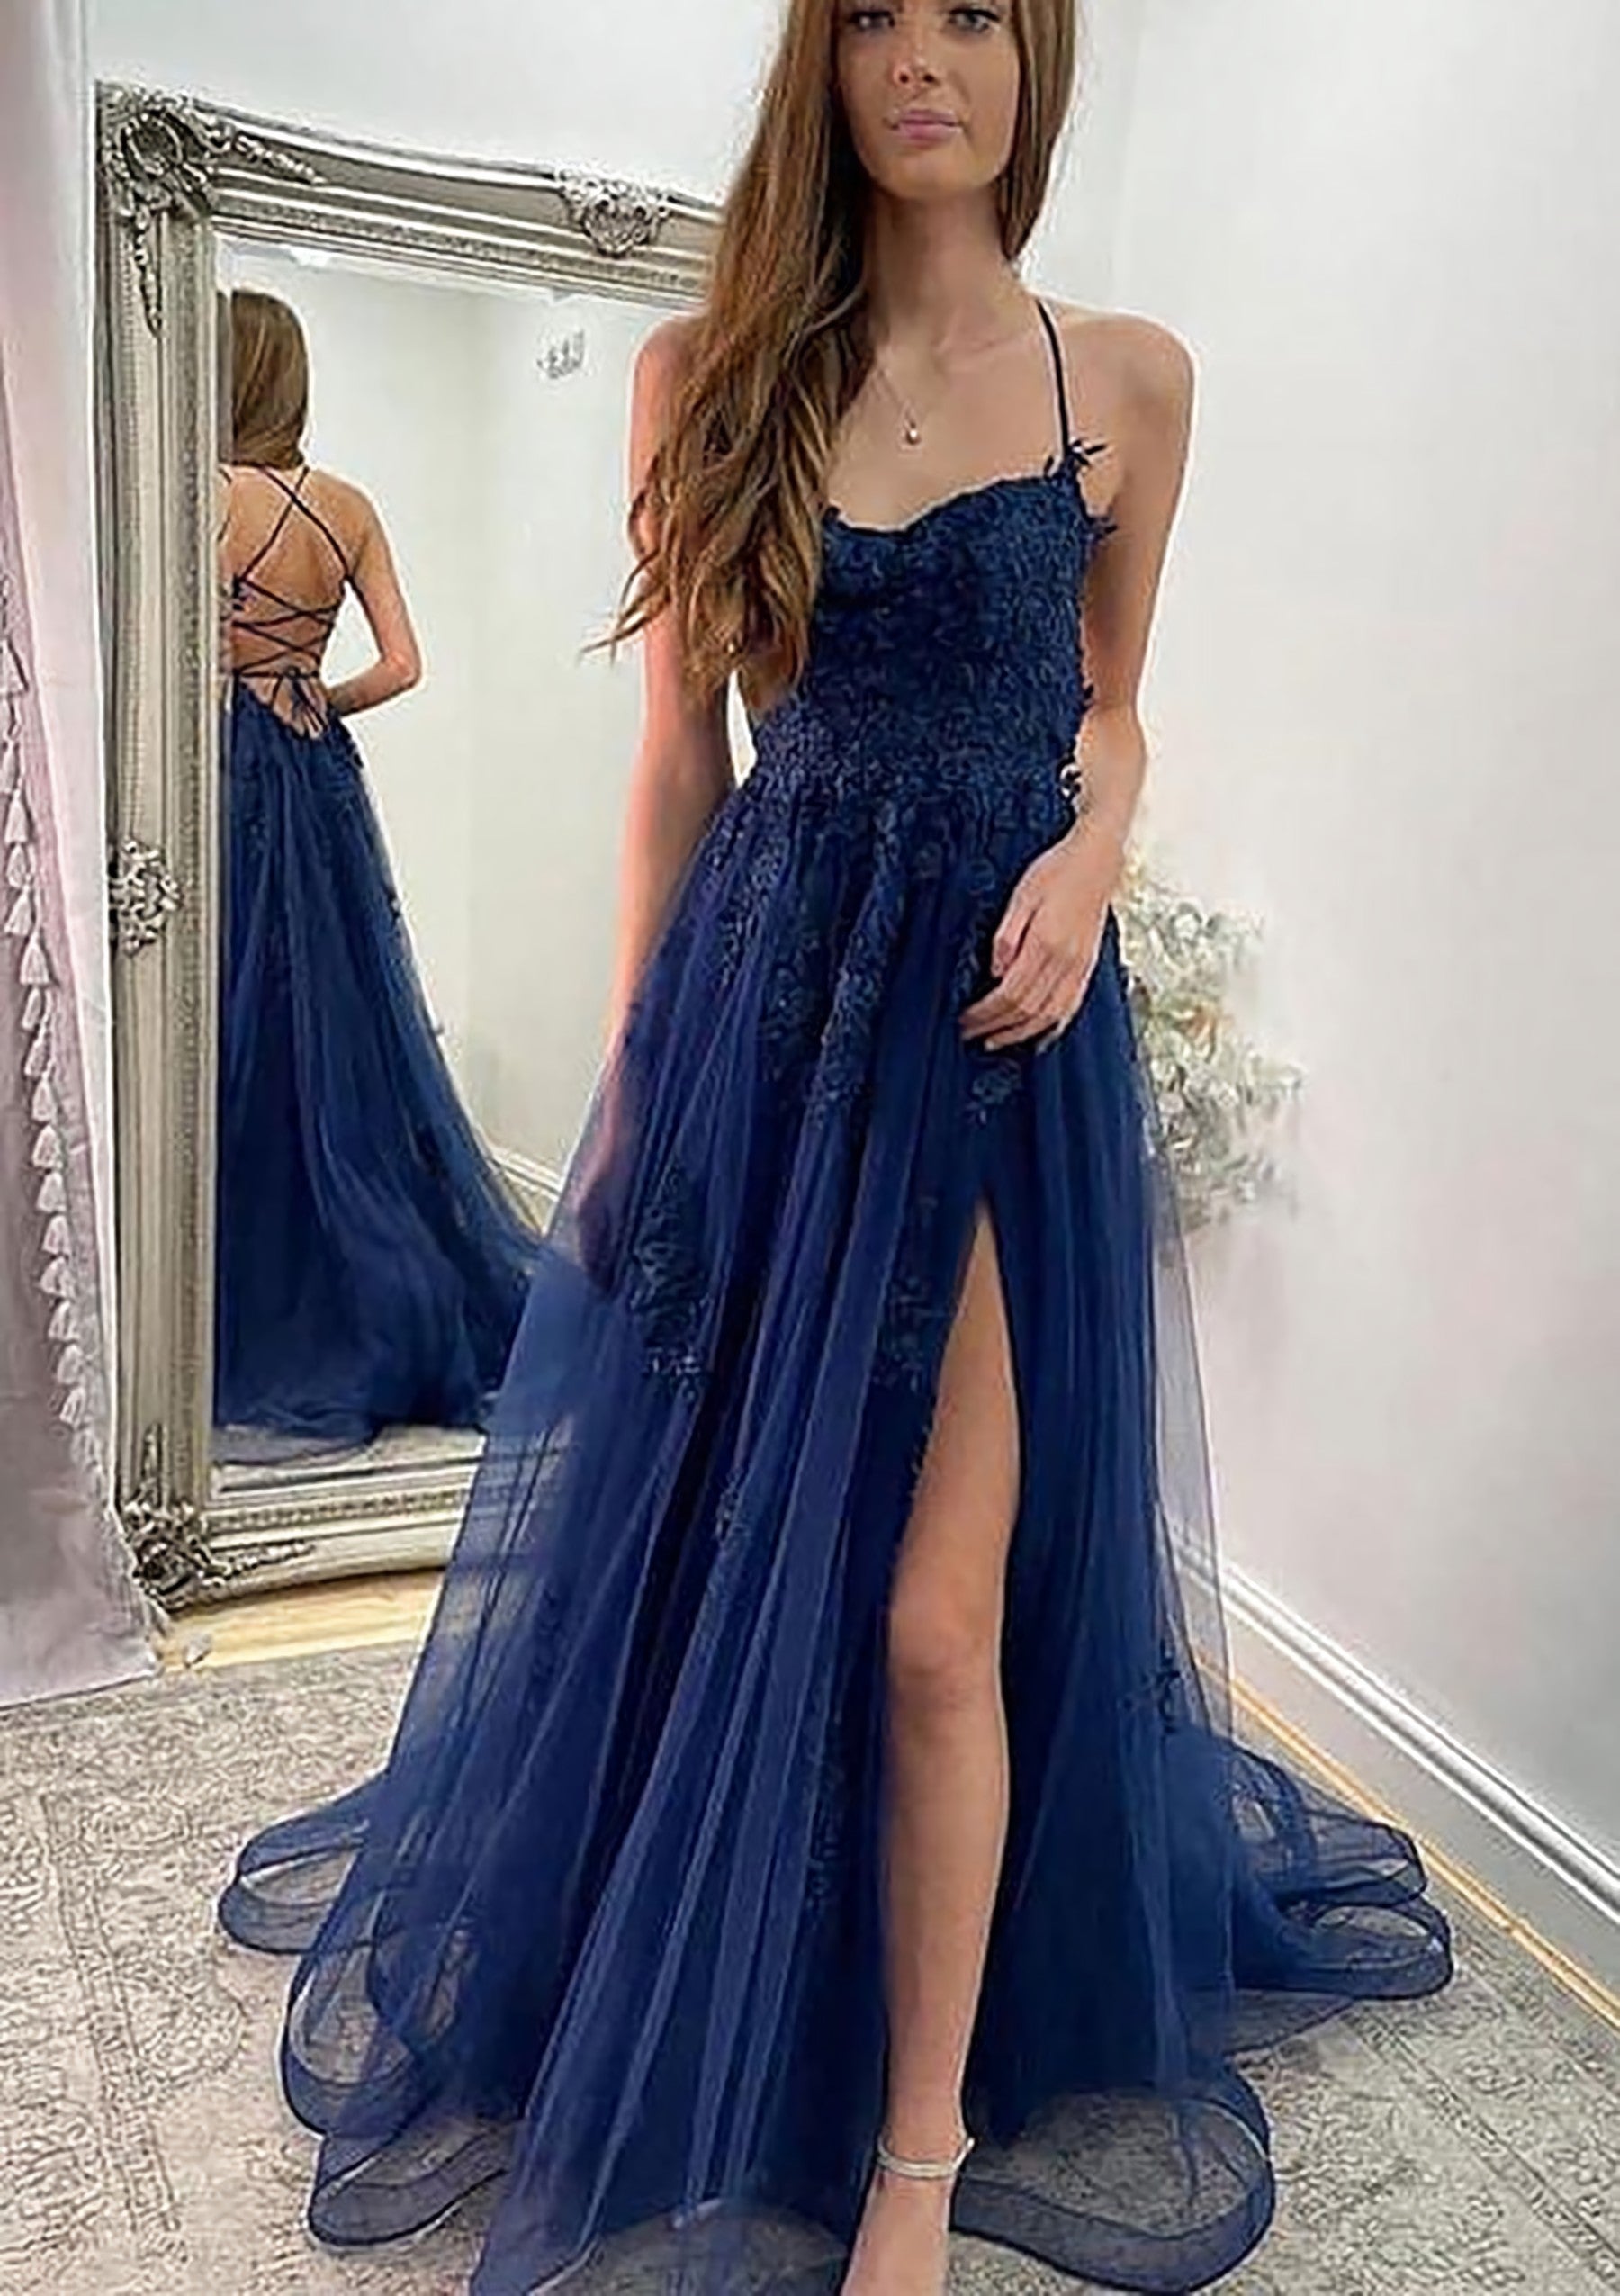 A-line Sweetheart Spaghetti Straps Sweep Train Tulle Corset Prom Dress With Appliqued Split outfit, Homecoming Dresses Fashion Outfits